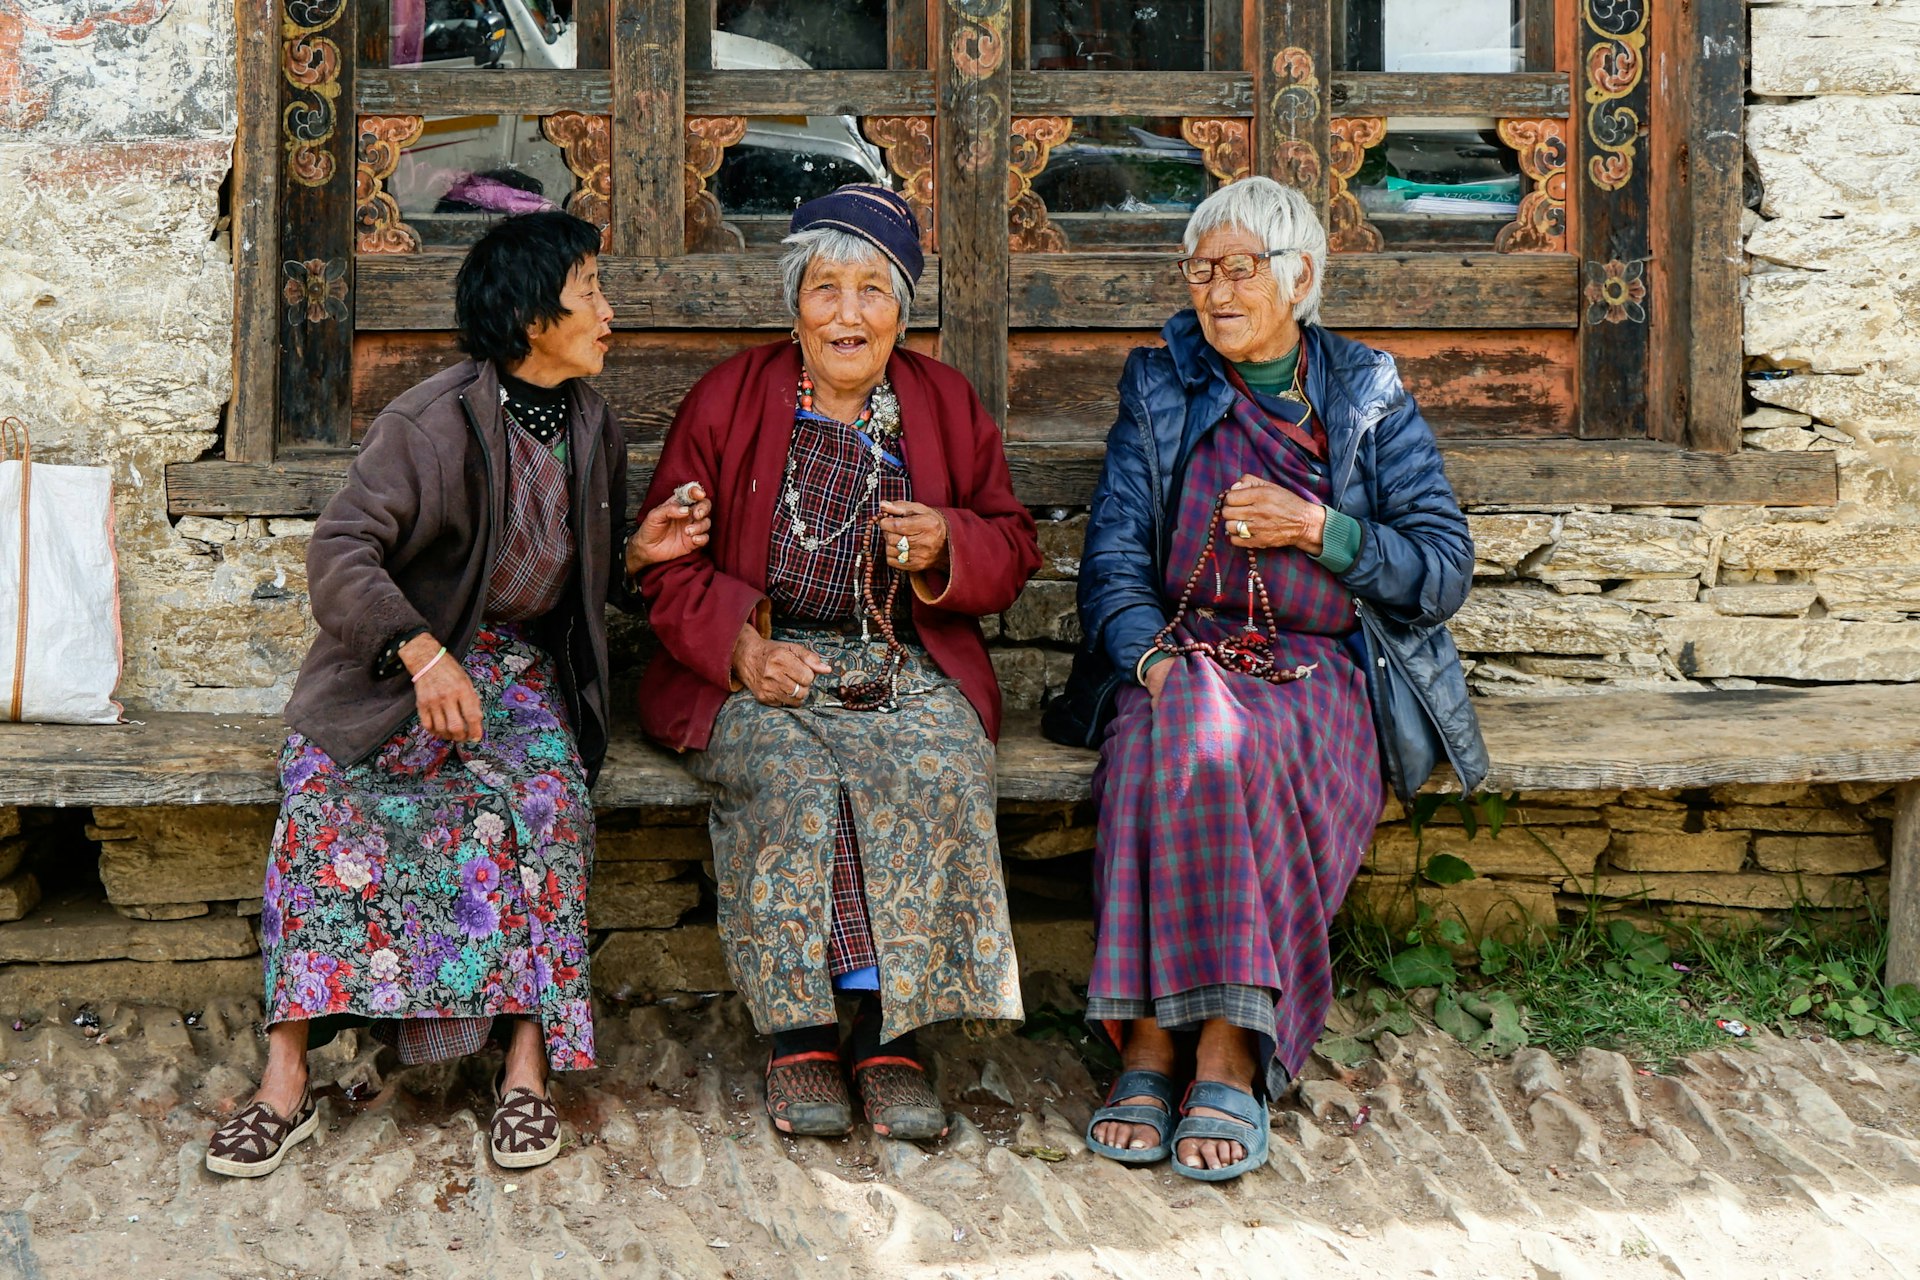 Three women sitting in front of a traditional house discussing and laughing, Mongar, Bhutan